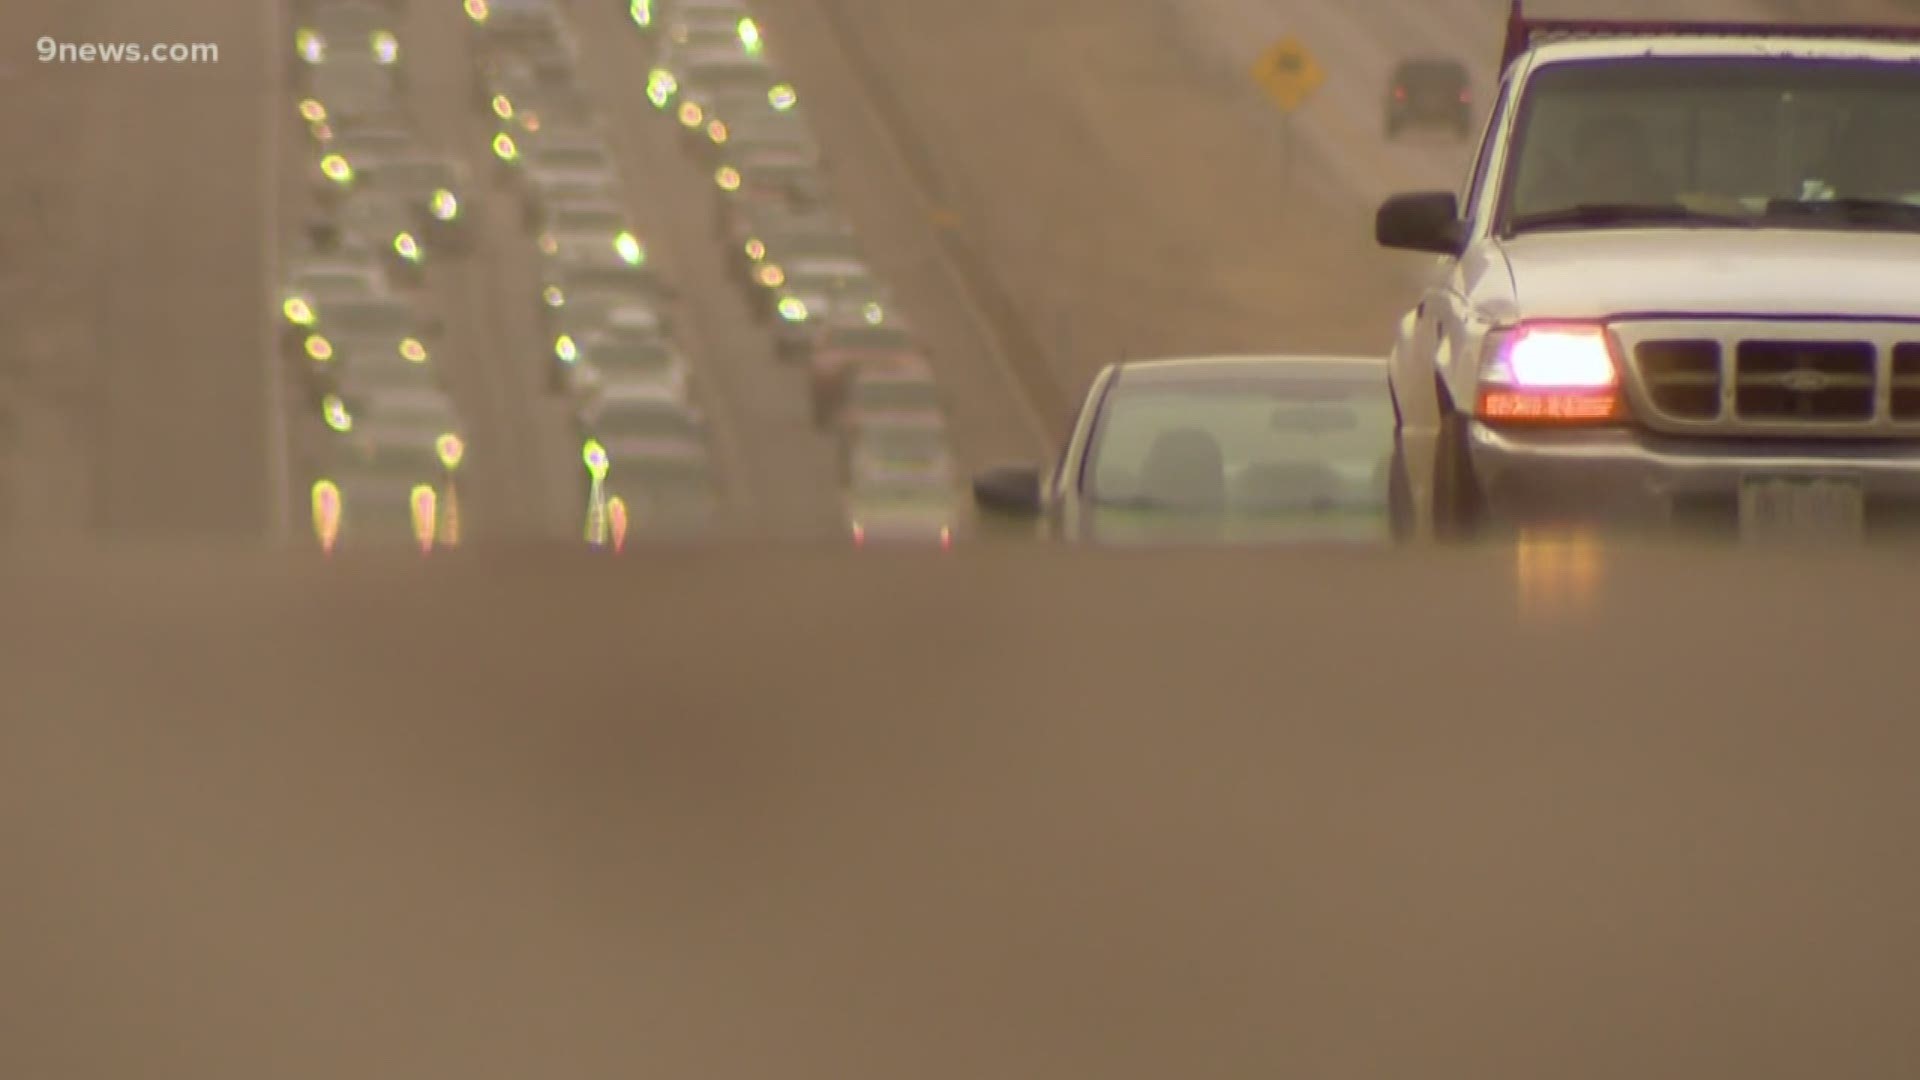 Two new apps are designed to cut down on I-70 traffic by helping people find carpooling options.